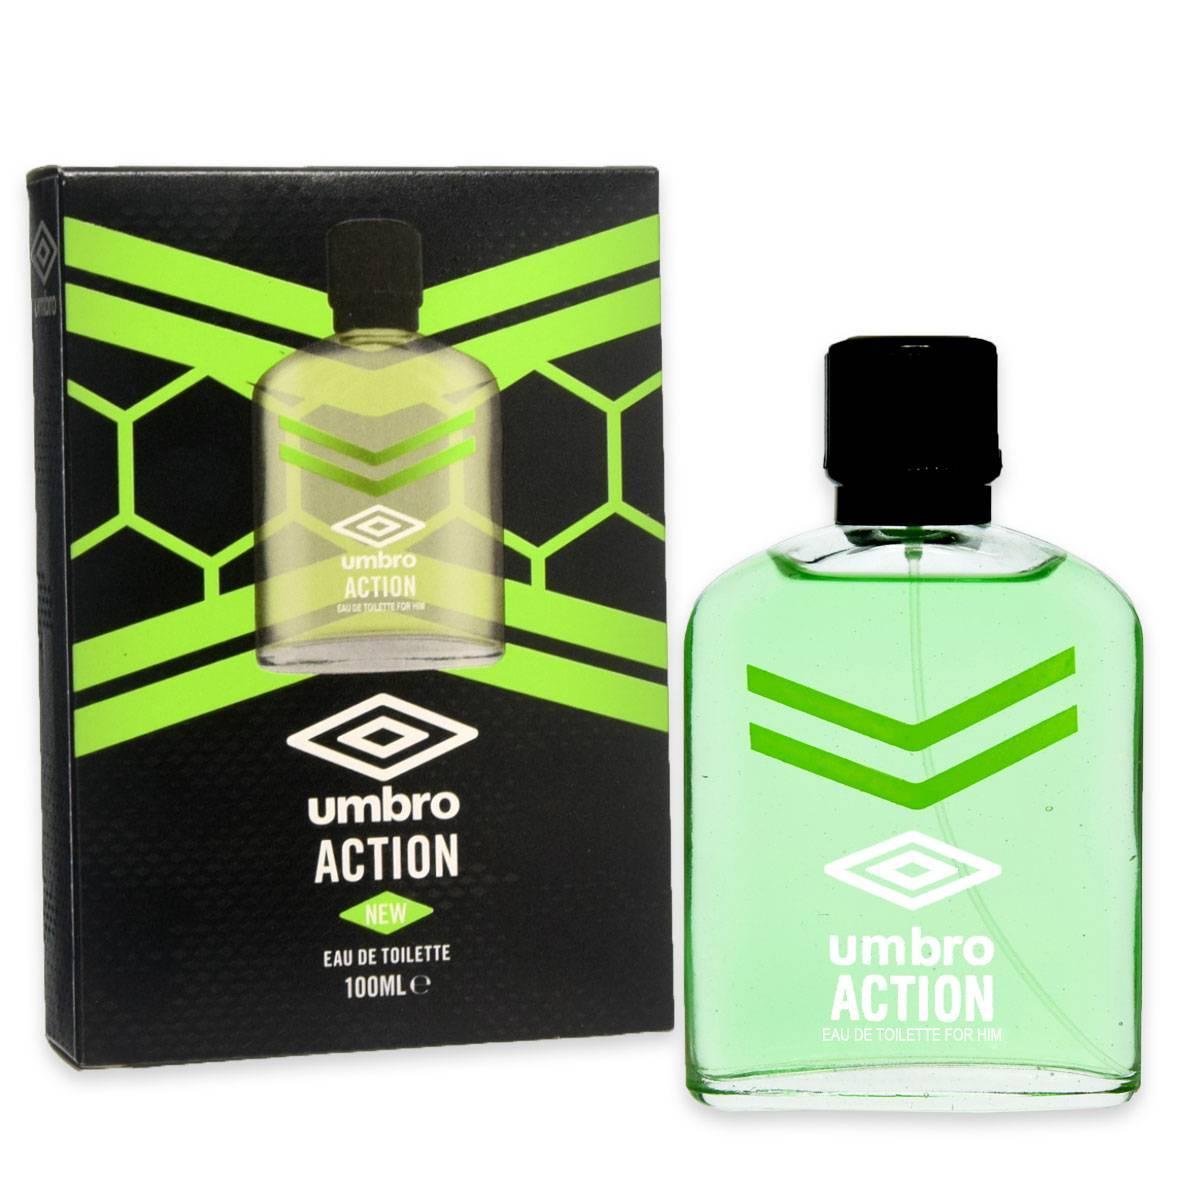 Selected image for Umbro Action Toaletna voda, 100 ml